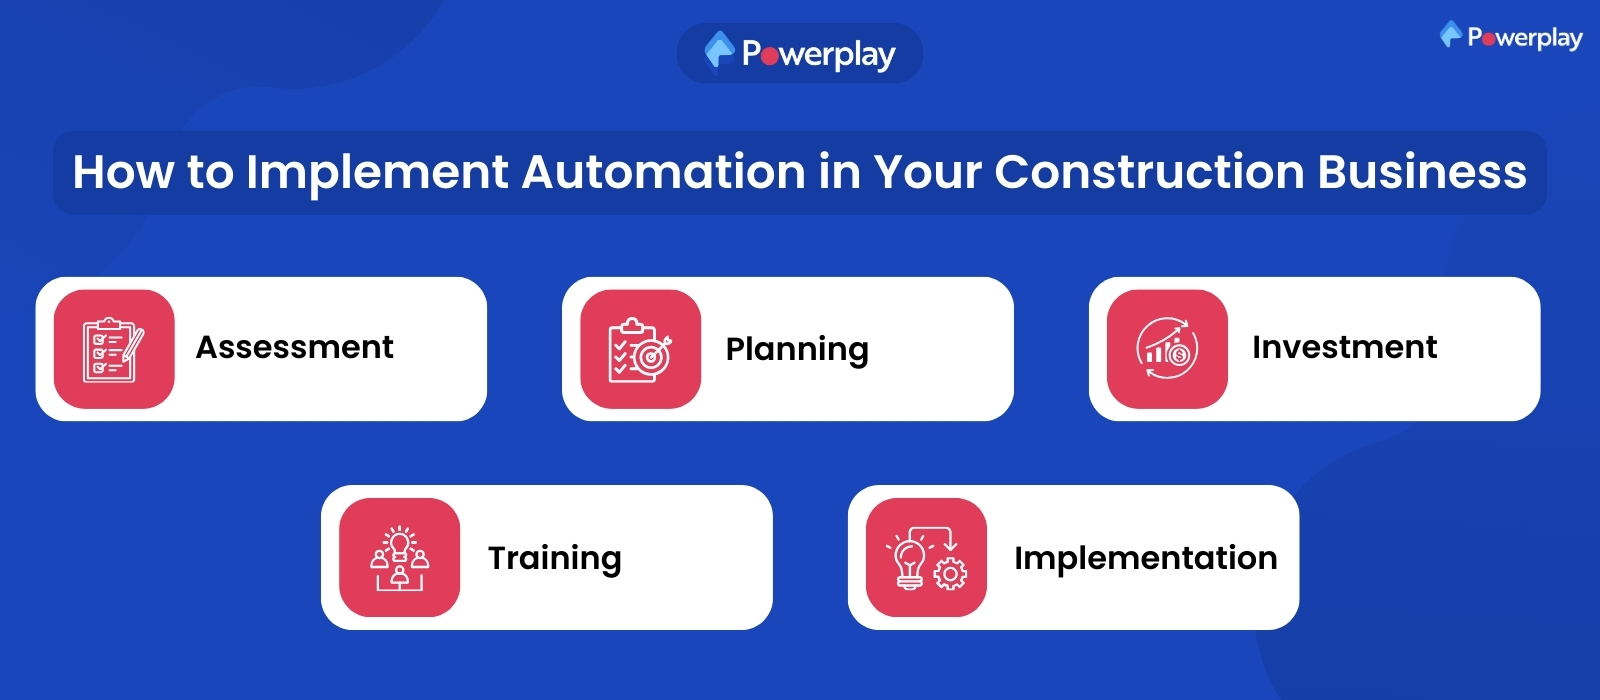 Automation in Construction Business 